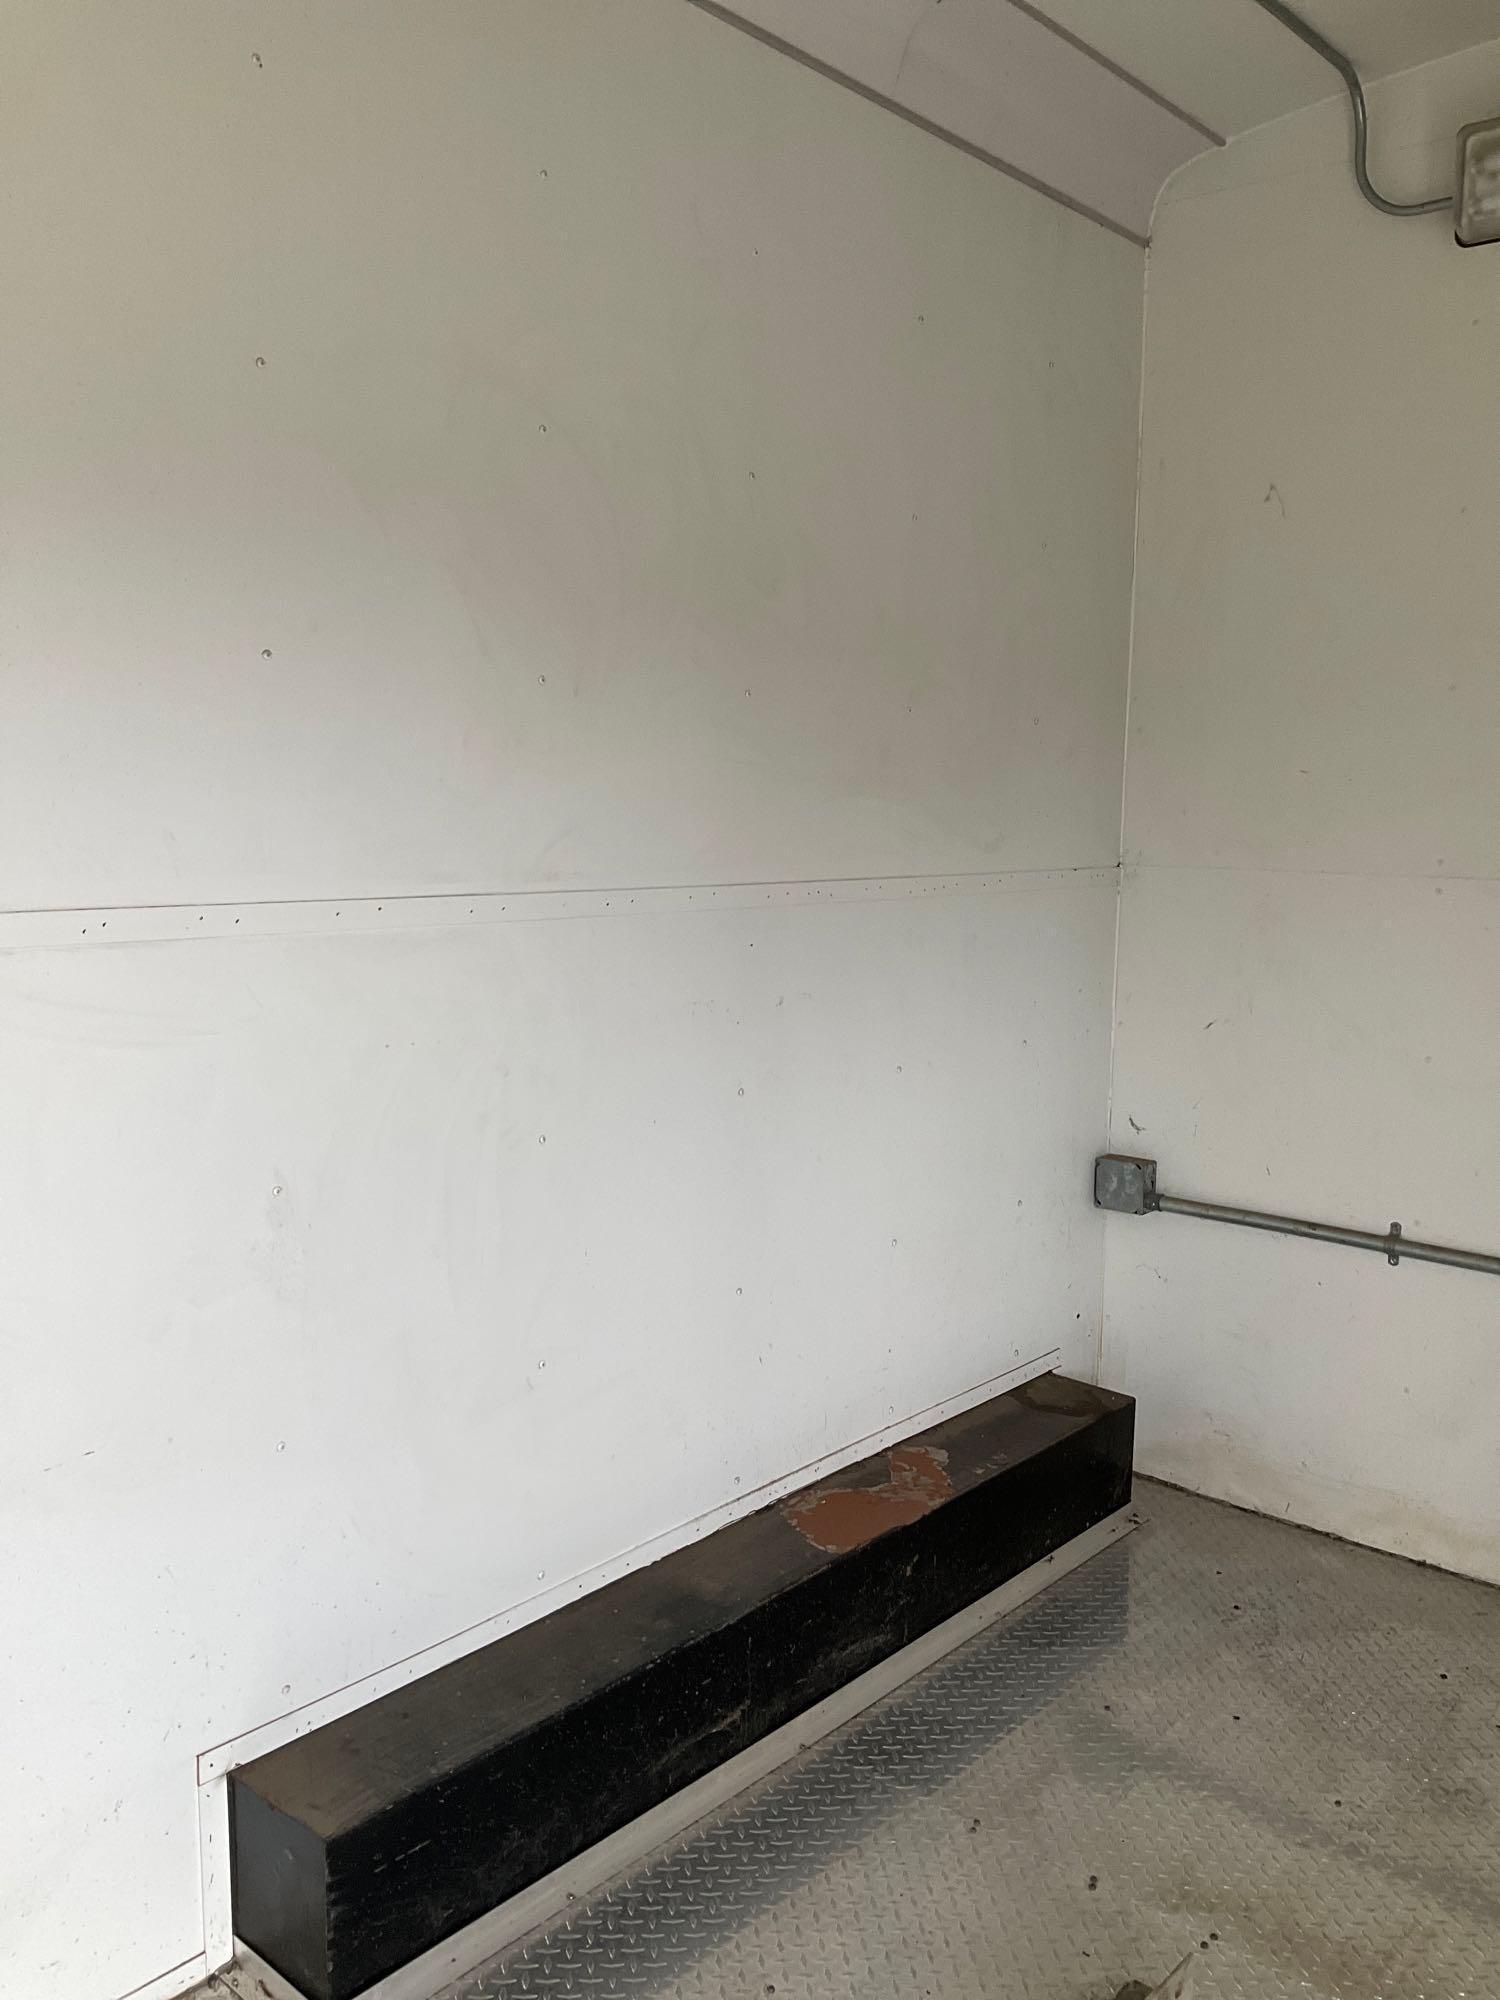 UNITED EXPRESS LINE ENCLOSED TRAILER, BOX APPROX 20FT LONG